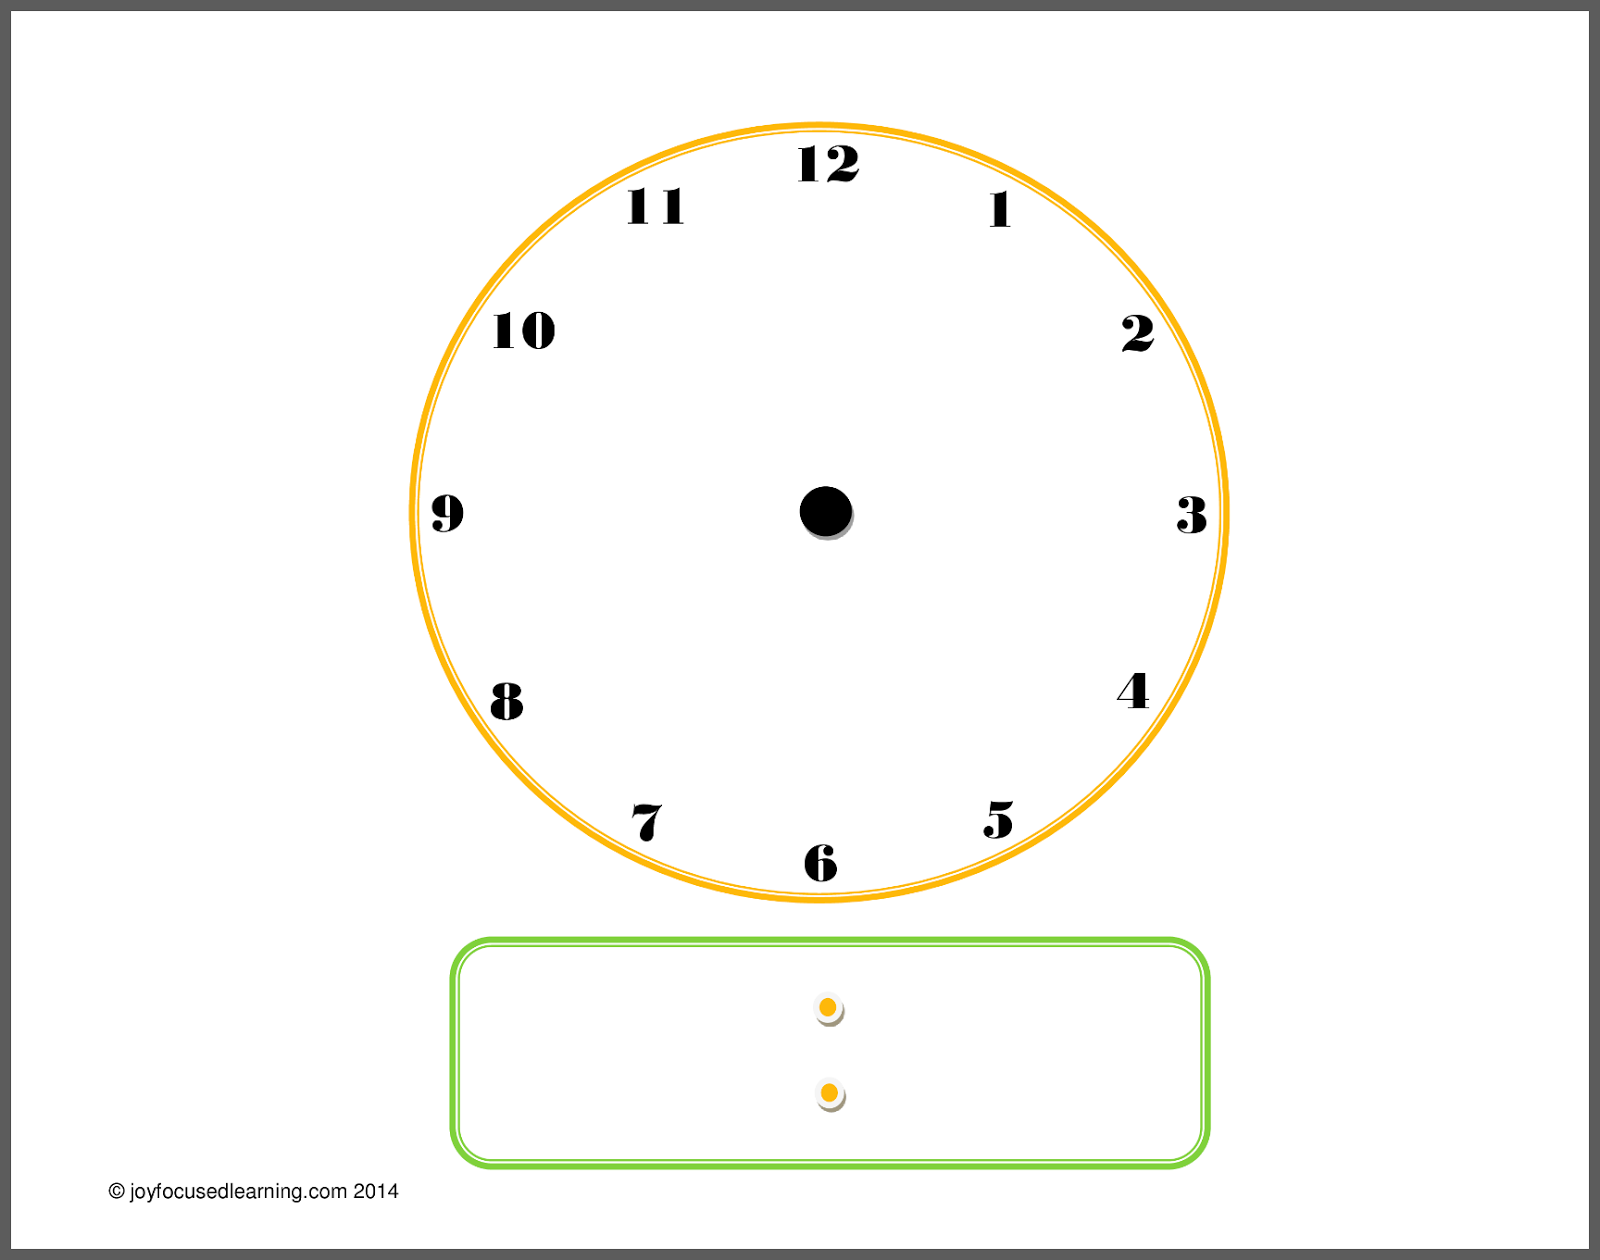 Collection of Blank Digital Clock Faces (34) .